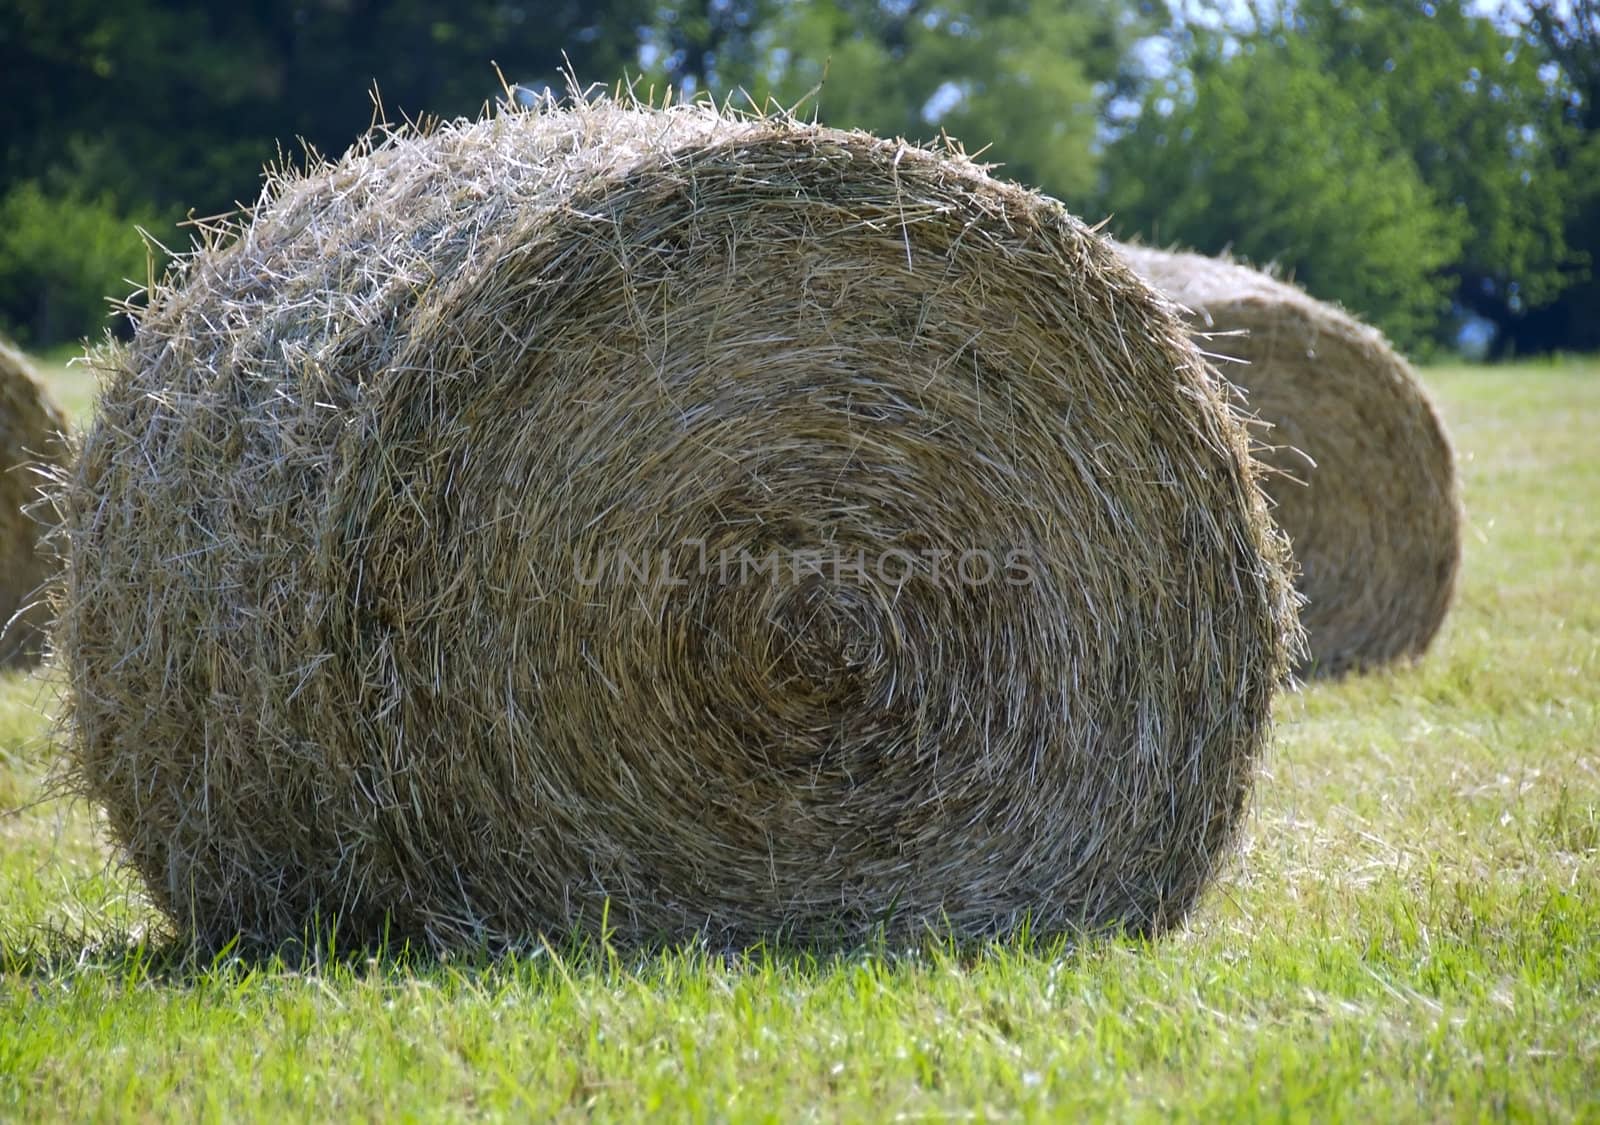 A freshly cut bale of hay dries in the warm summer sun